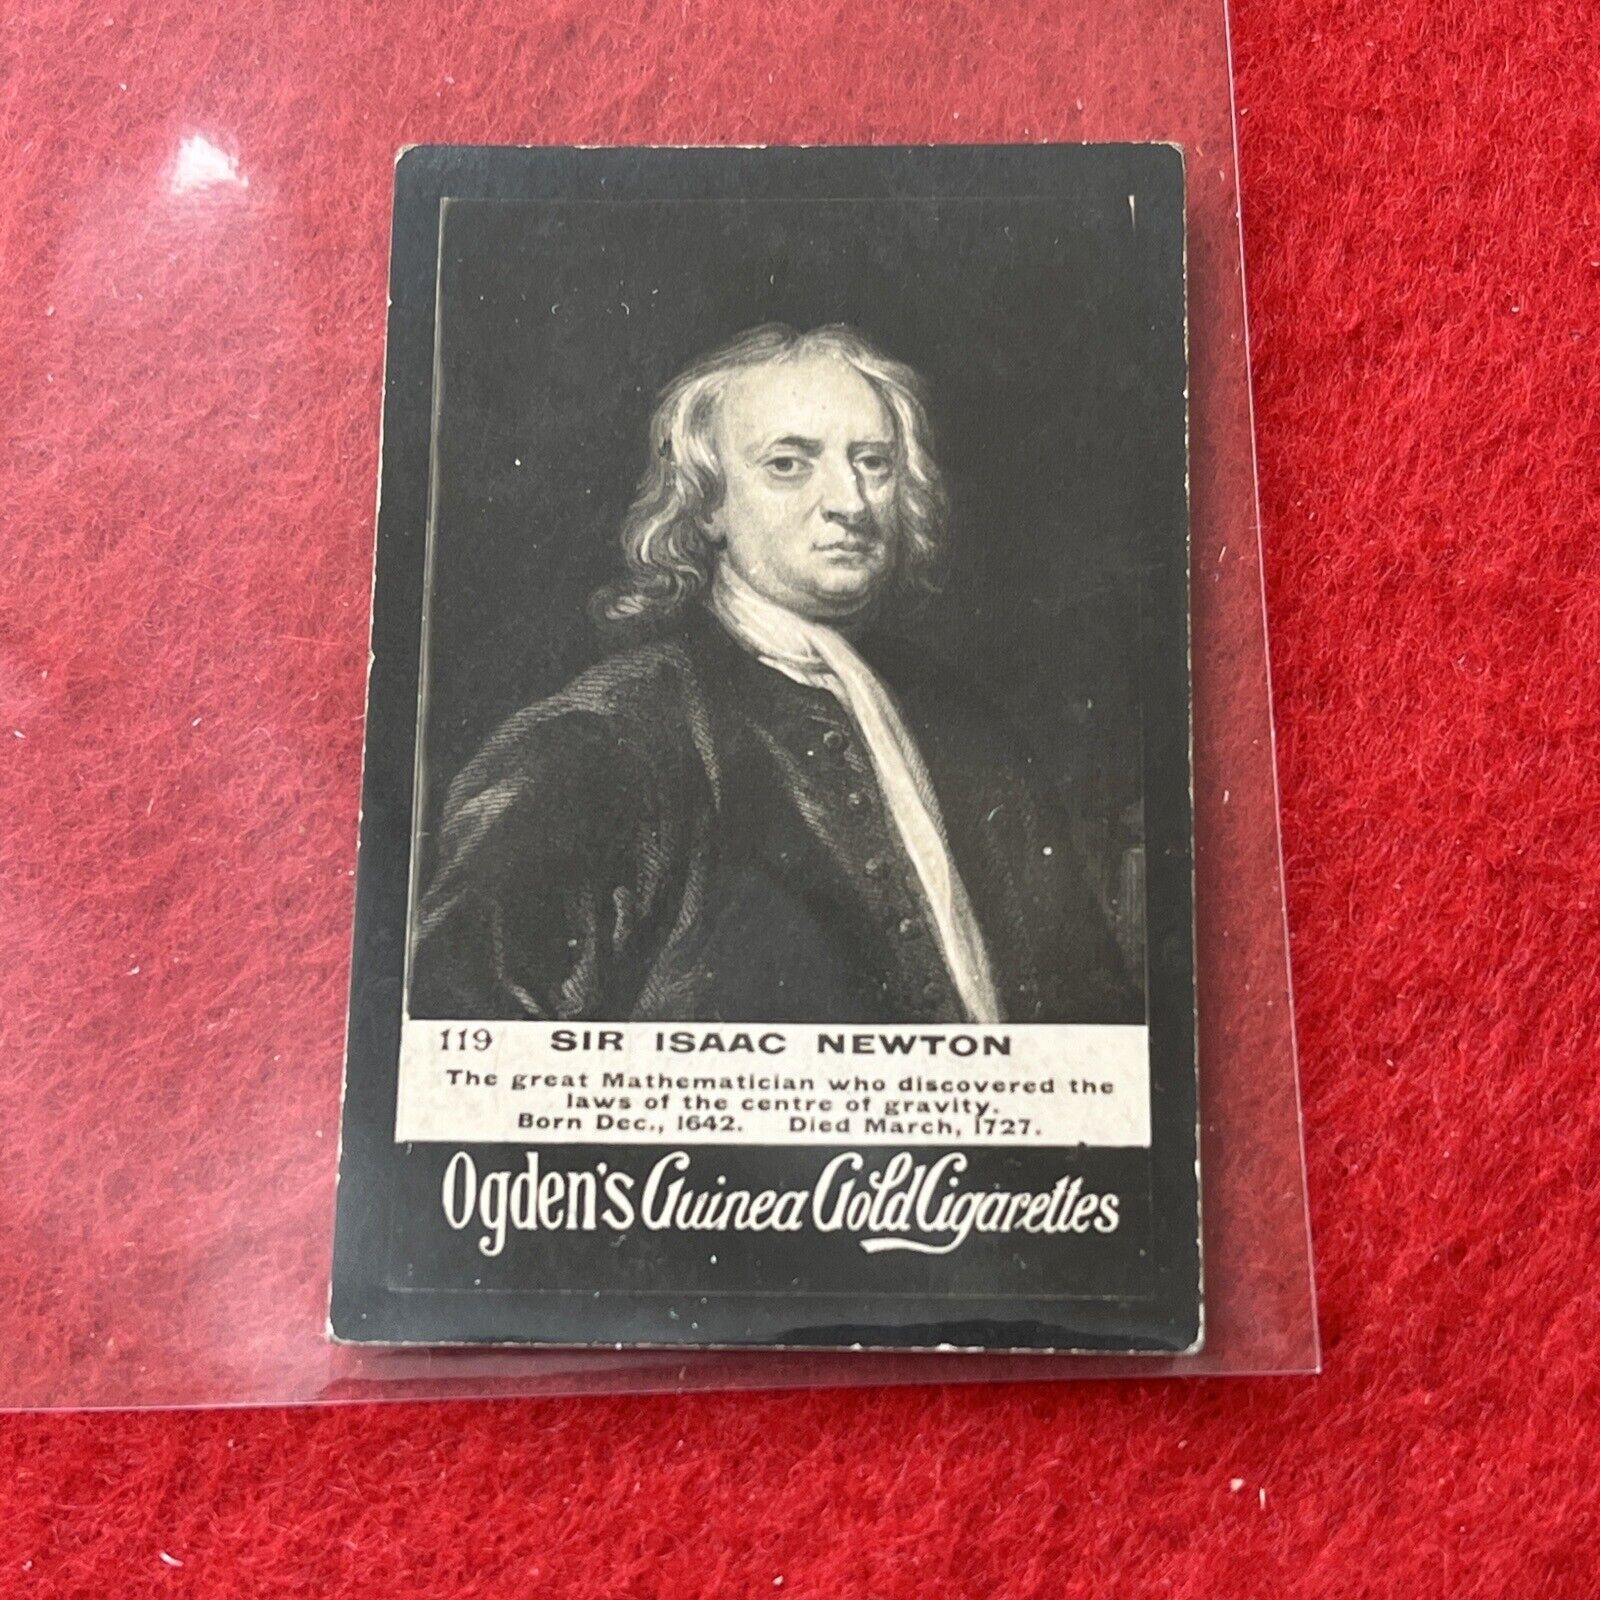 1901 Ogden’s Guinea Gold Cigarettes SIR ISSAC NEWTON Card #119 Card In EX Cond.